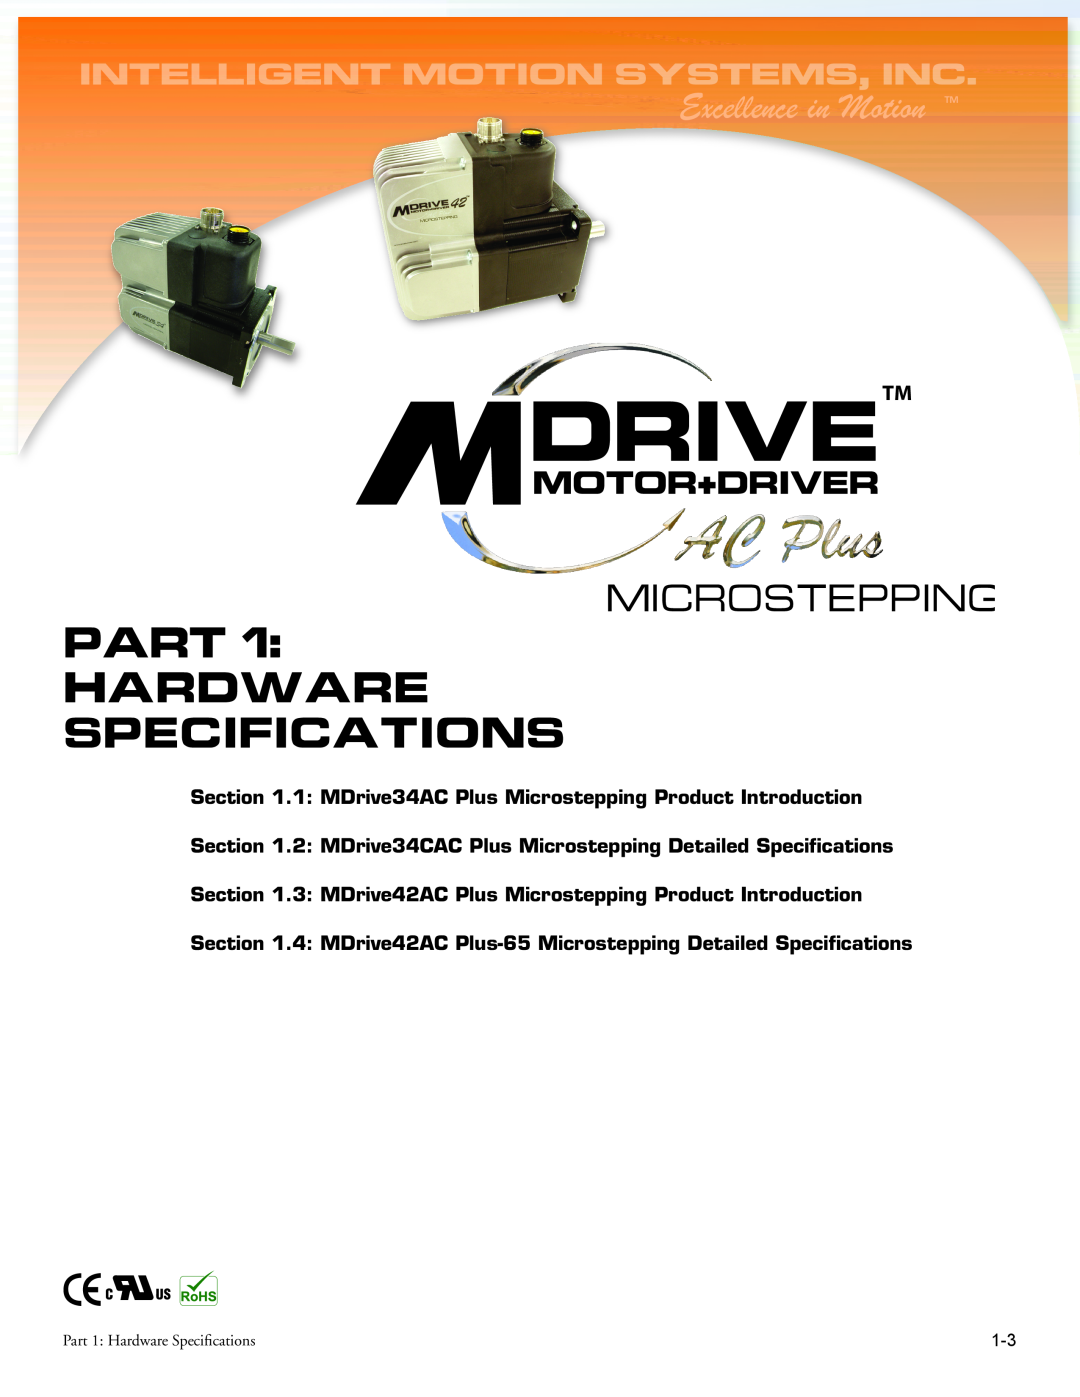 Intelligent Motion Systems MDrive34AC manual Excellence in Motion TM, Part Hardware Specifications, mICROSTEPPING 